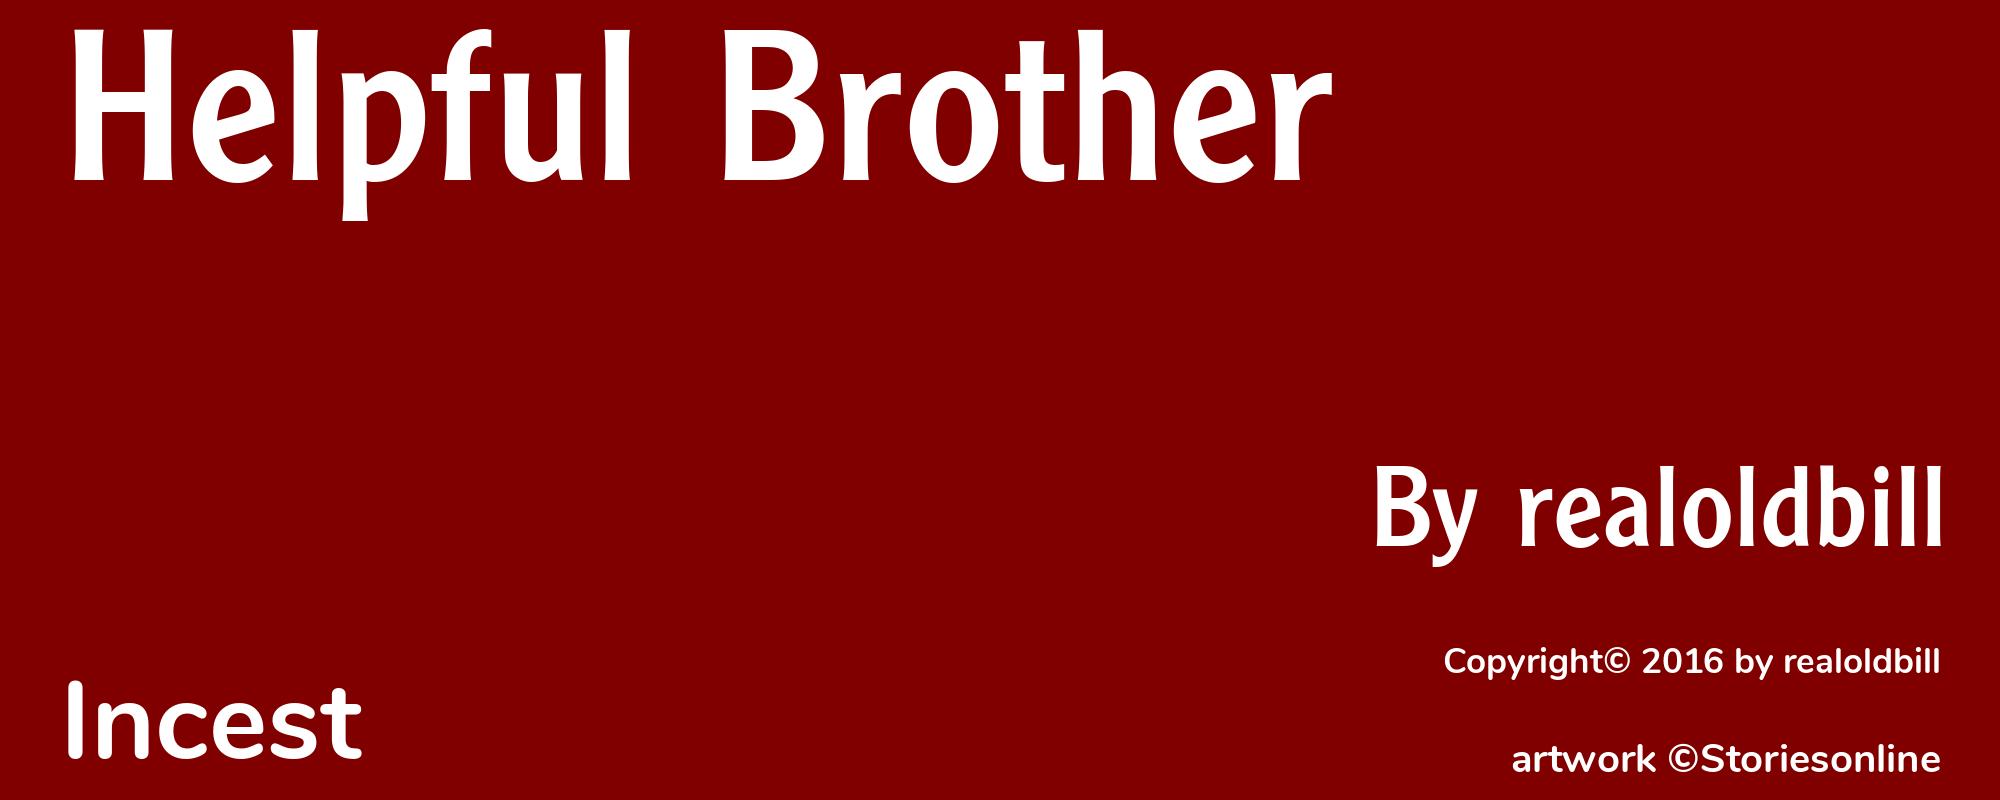 Helpful Brother - Cover